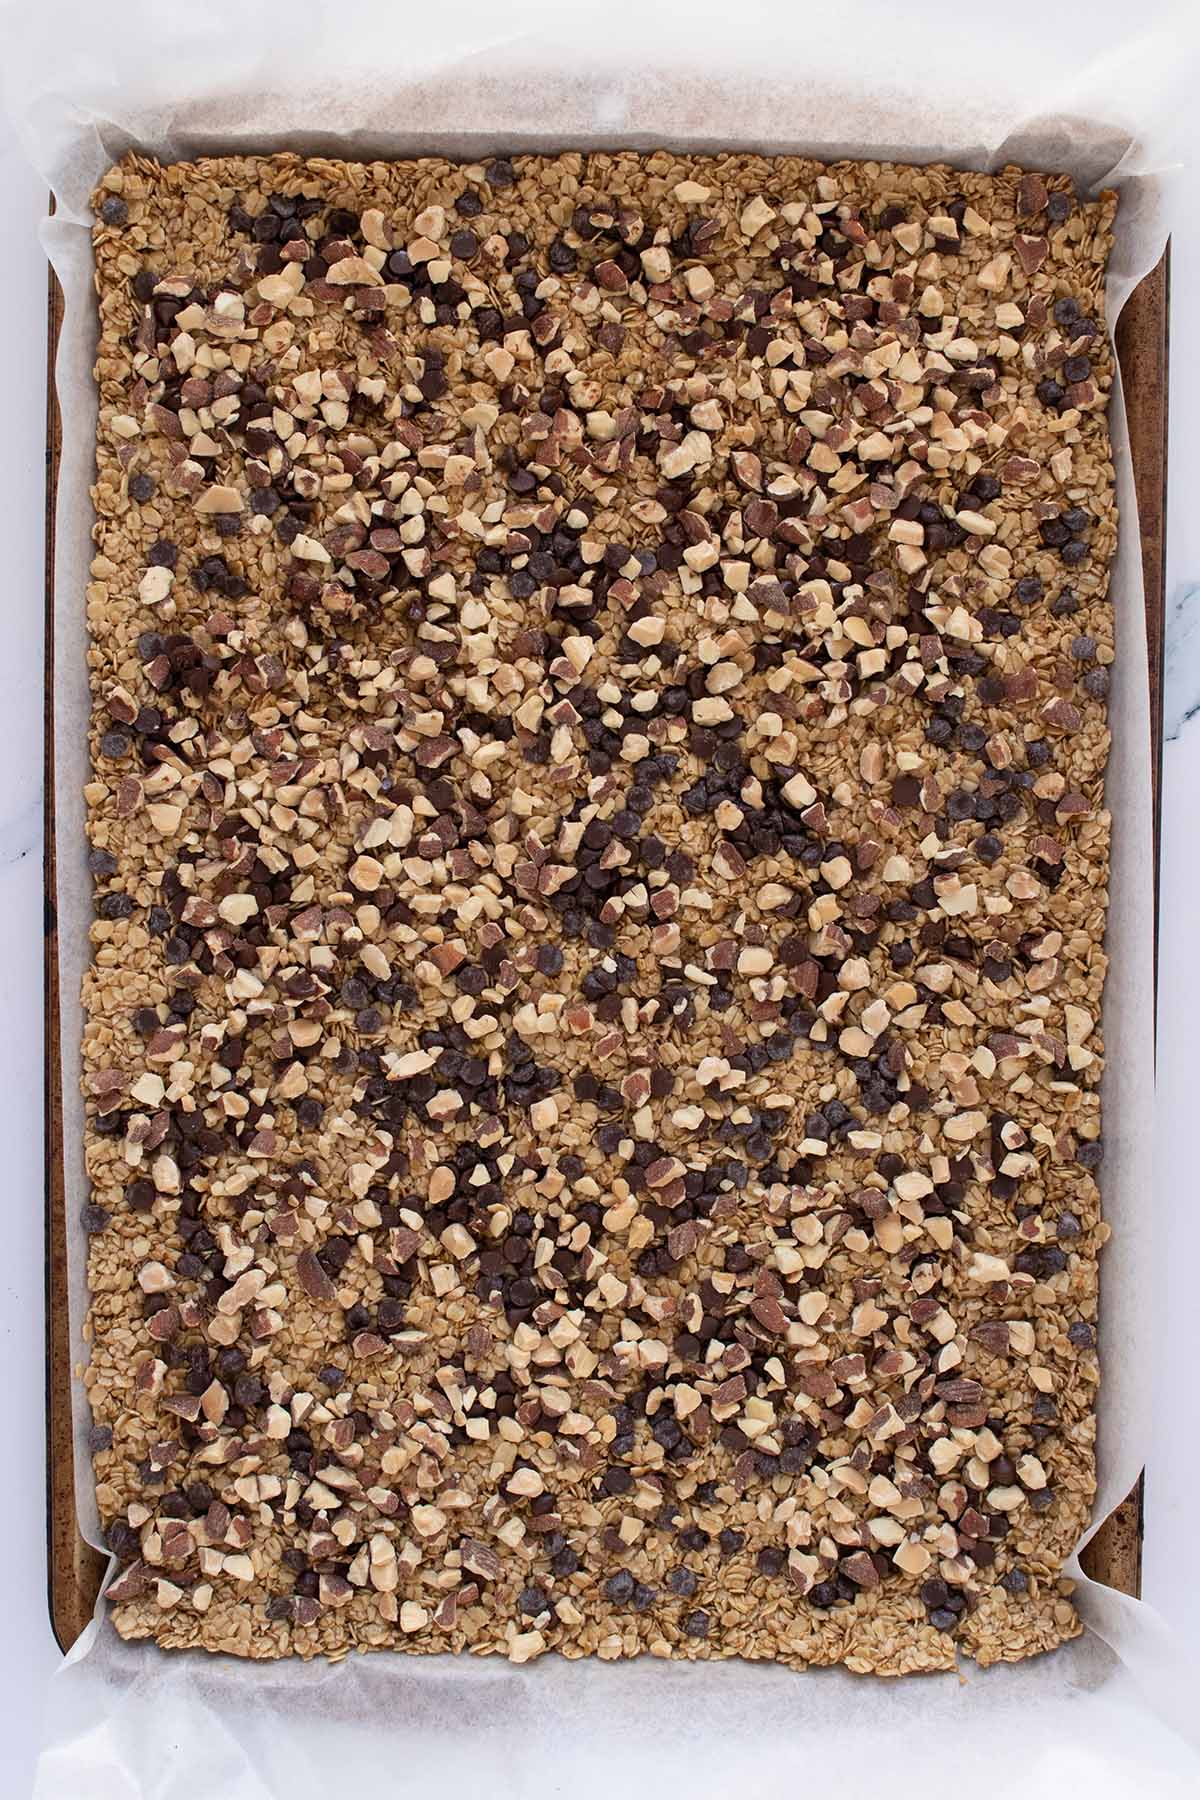 Overhead view of oat mixture sprinked with mini chocolate chips and toasted almonds